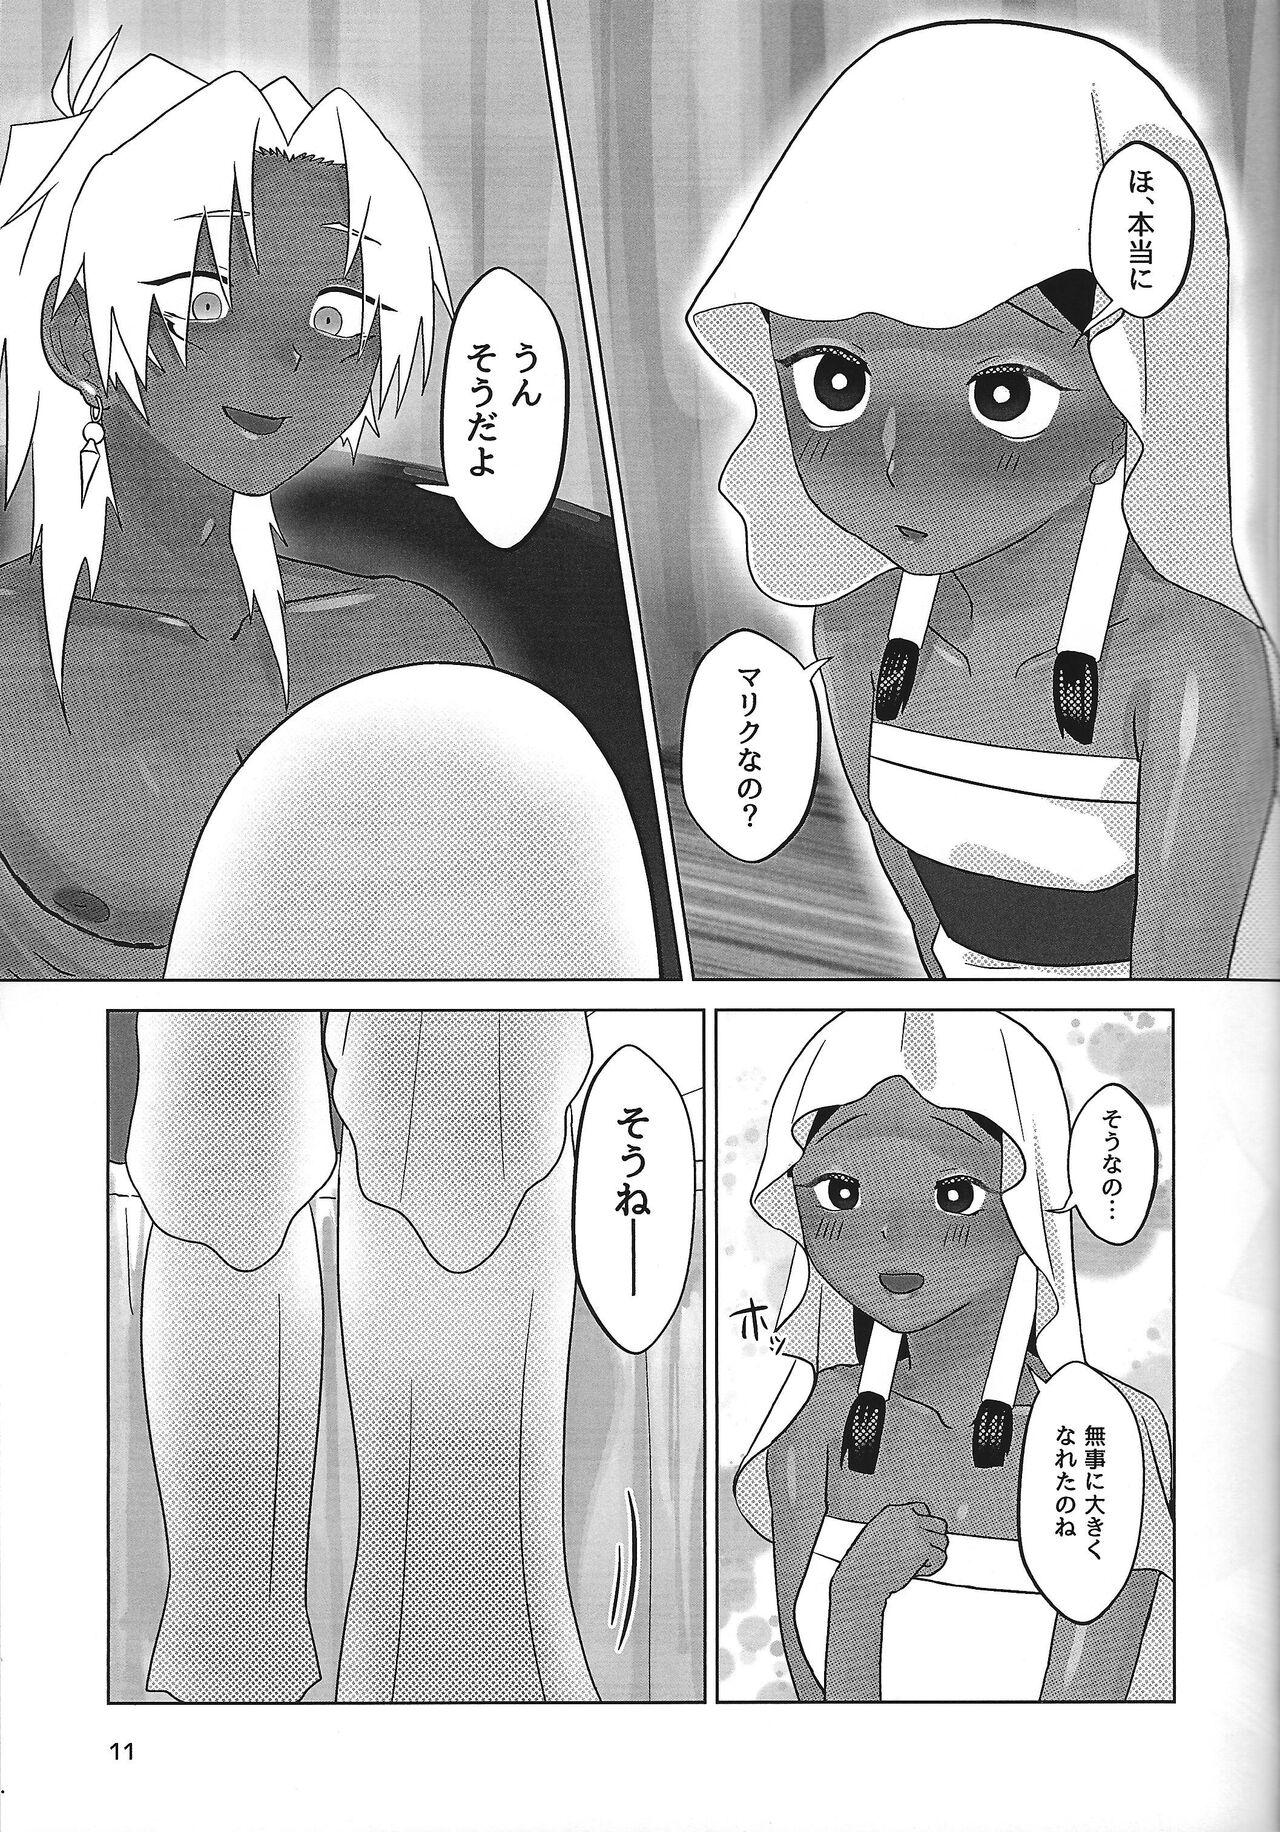 Young Old Ane. Ane. Ane. - Yu-gi-oh Cameltoe - Page 11